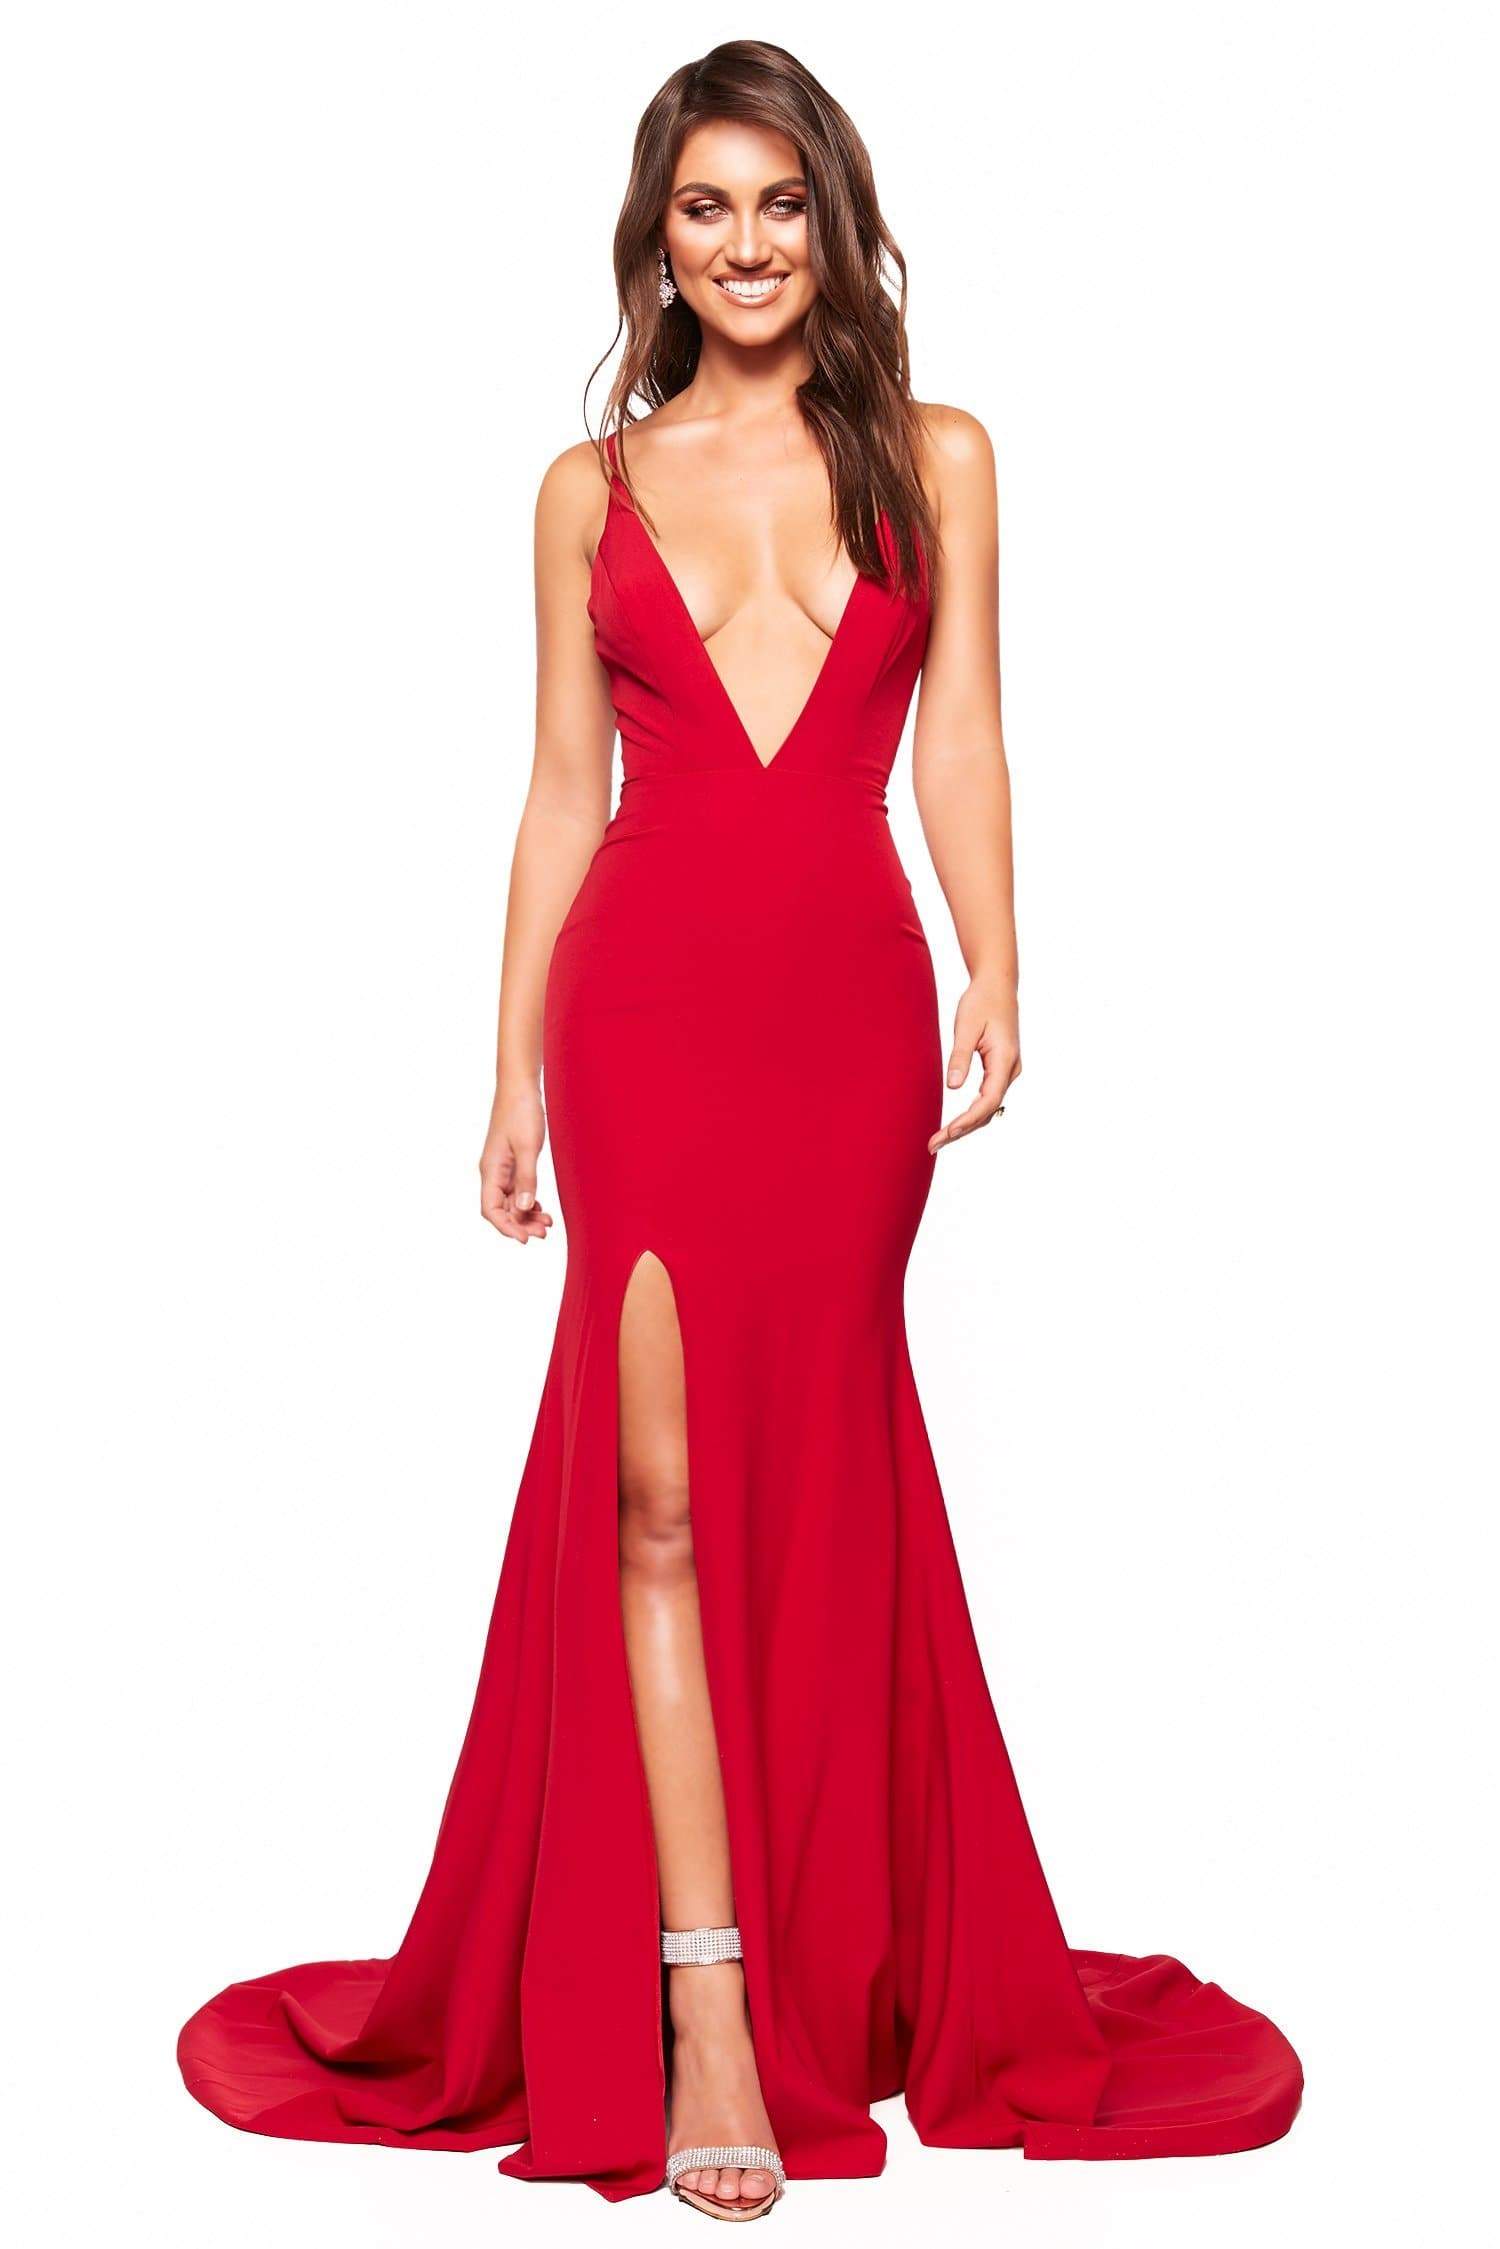 red dress with plunging neckline